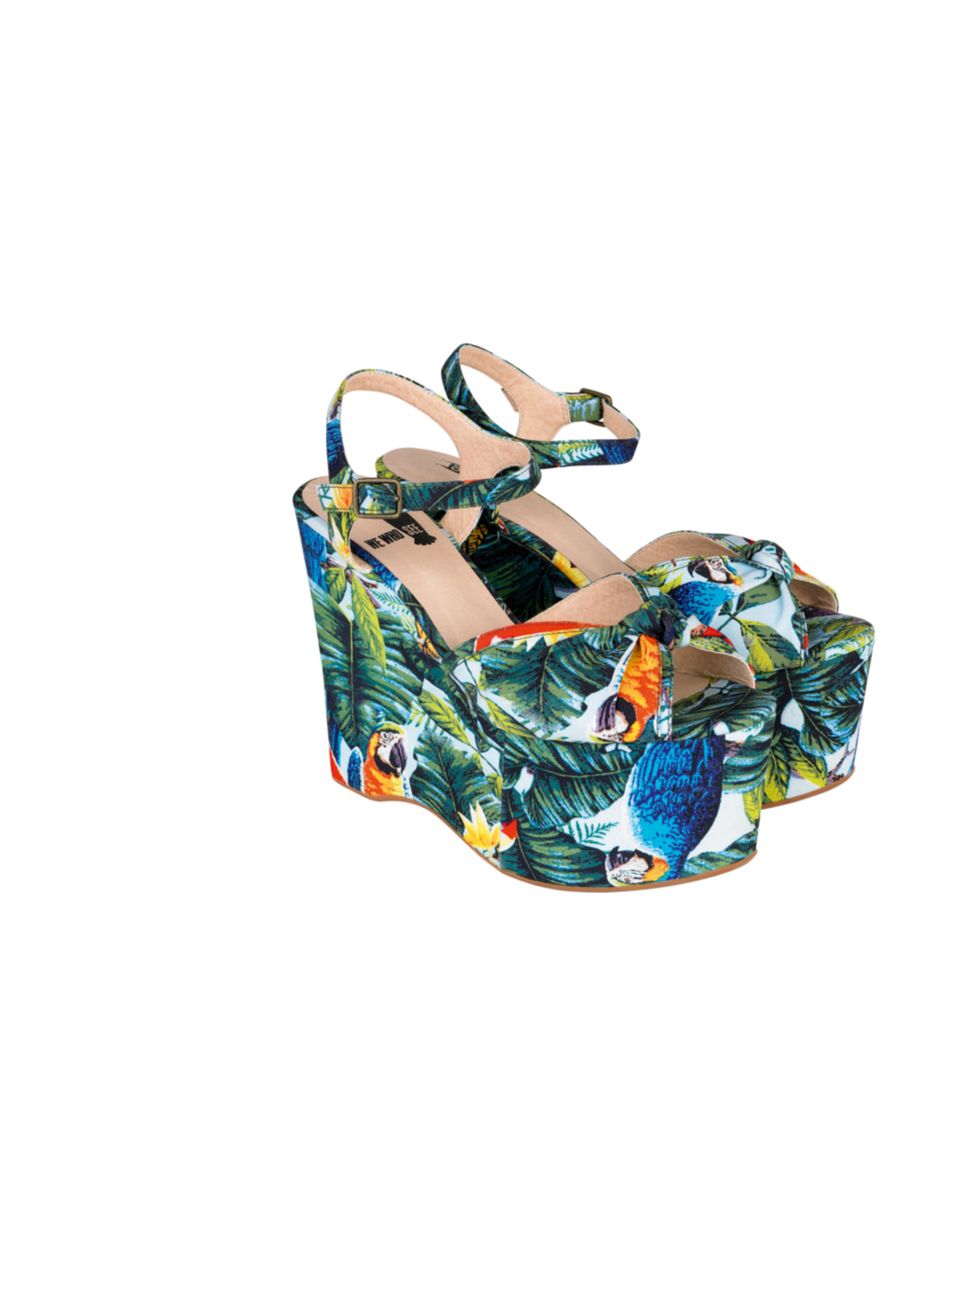 <p>Urban Outfitters parrot print wedges, £75</p><p><a href="http://shopping.elleuk.com/browse?fts=urban+outfitters+parrot">BUY NOW</a></p>